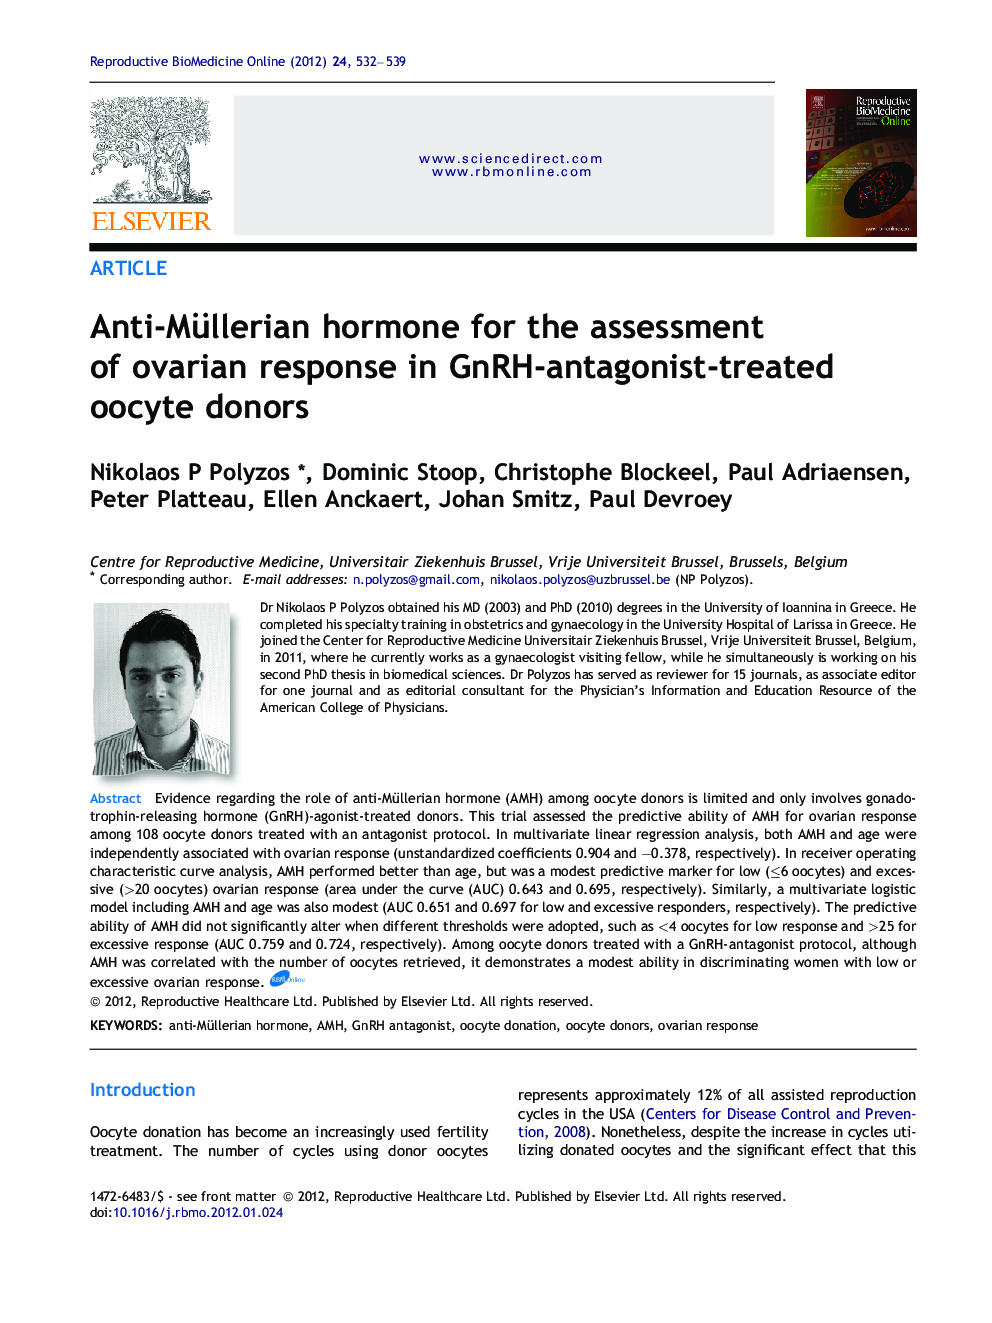 Anti-Müllerian hormone for the assessment of ovarian response in GnRH-antagonist-treated oocyte donors